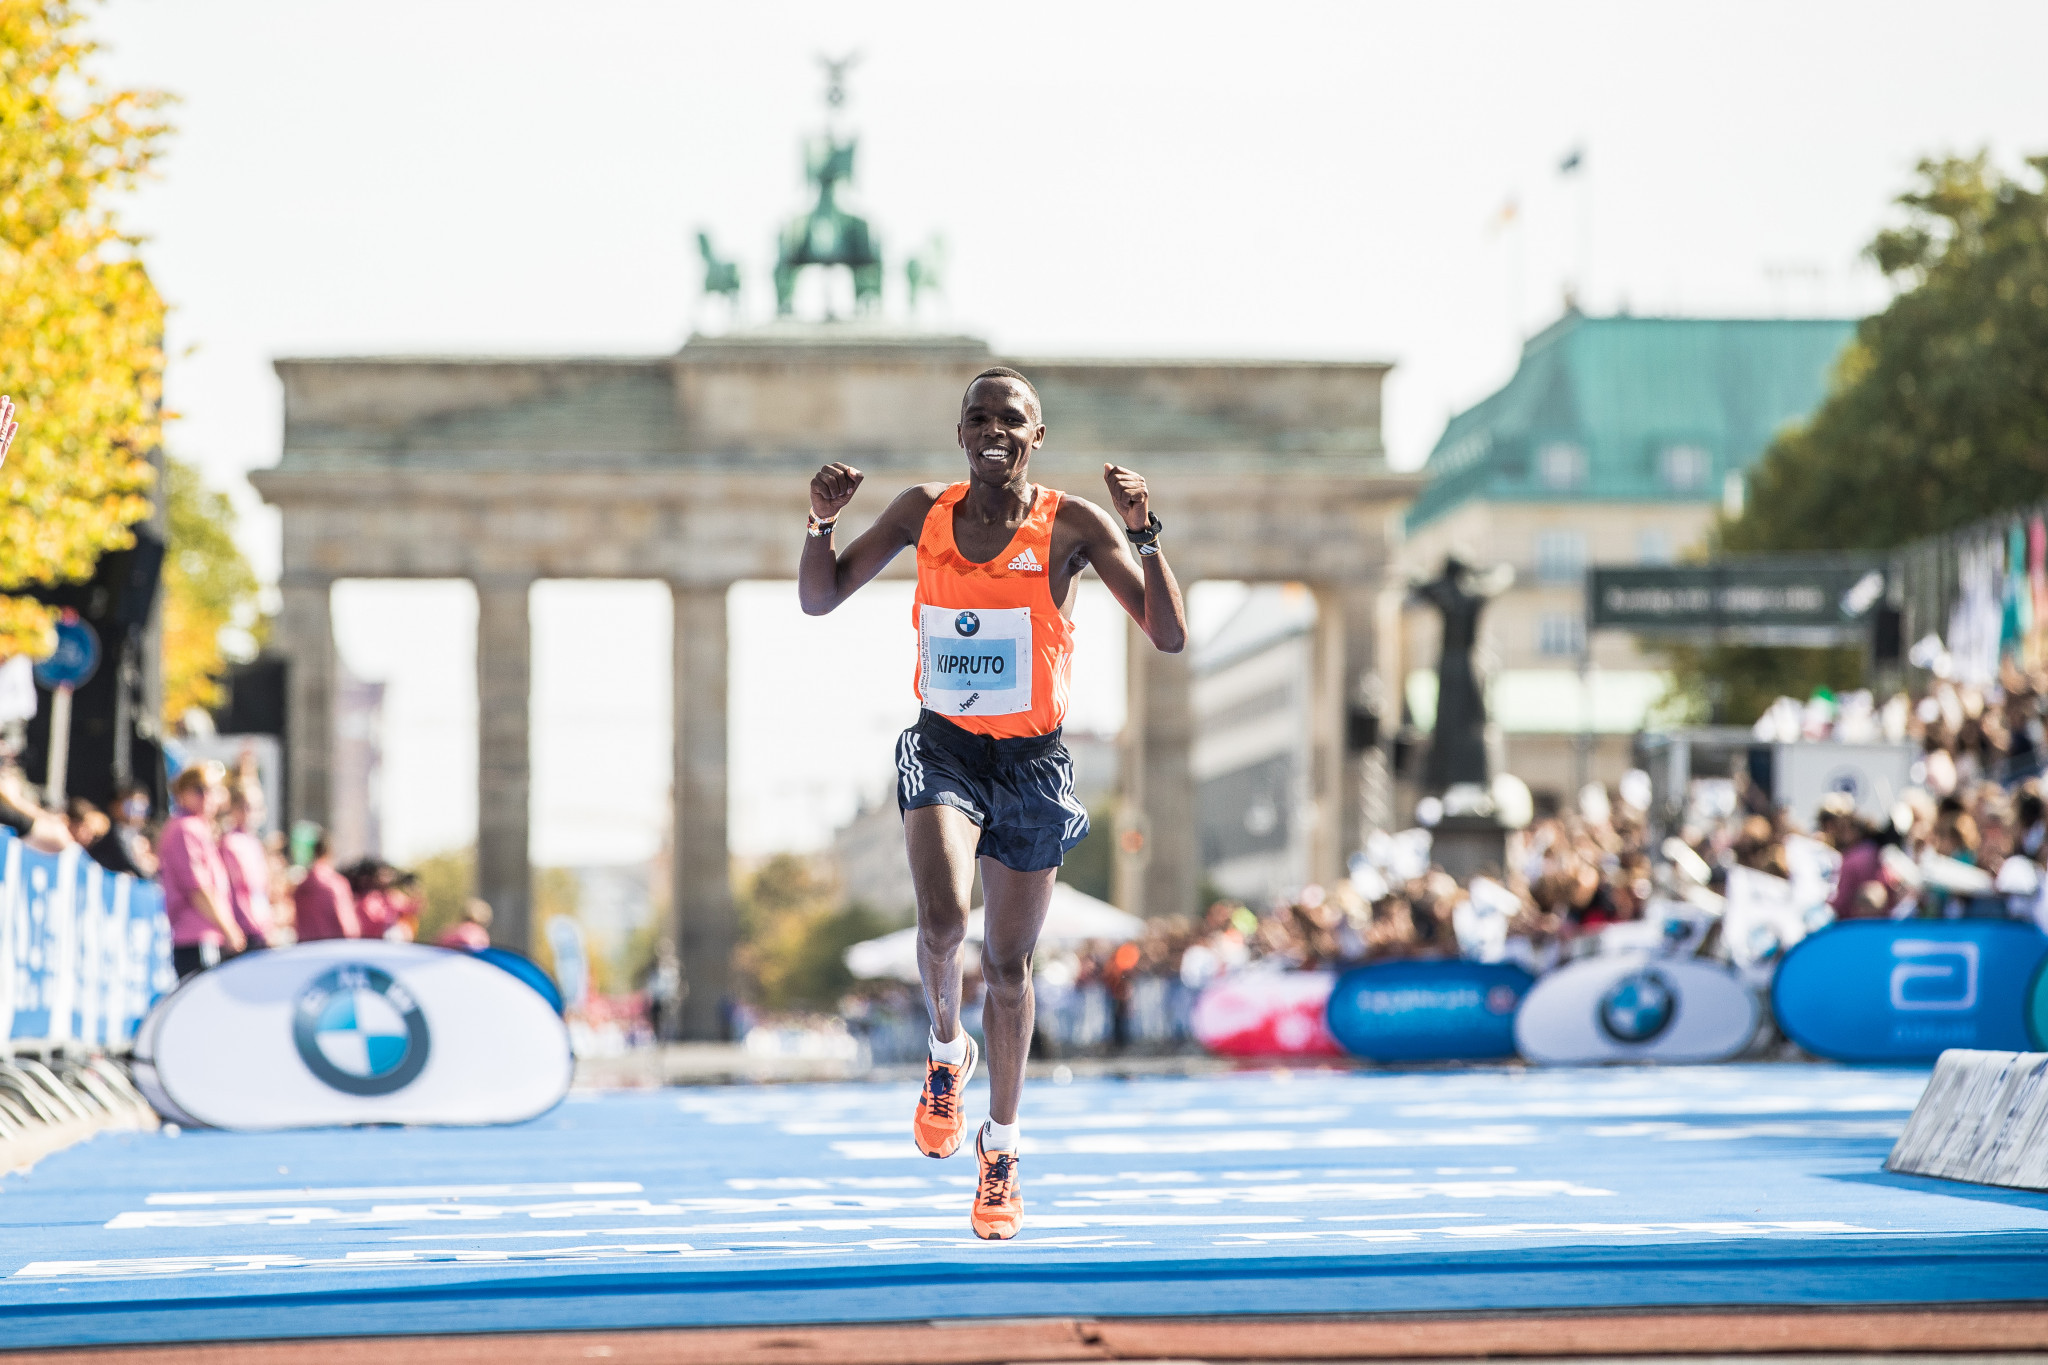 Berlin Marathon will not go ahead on scheduled date due to pandemic